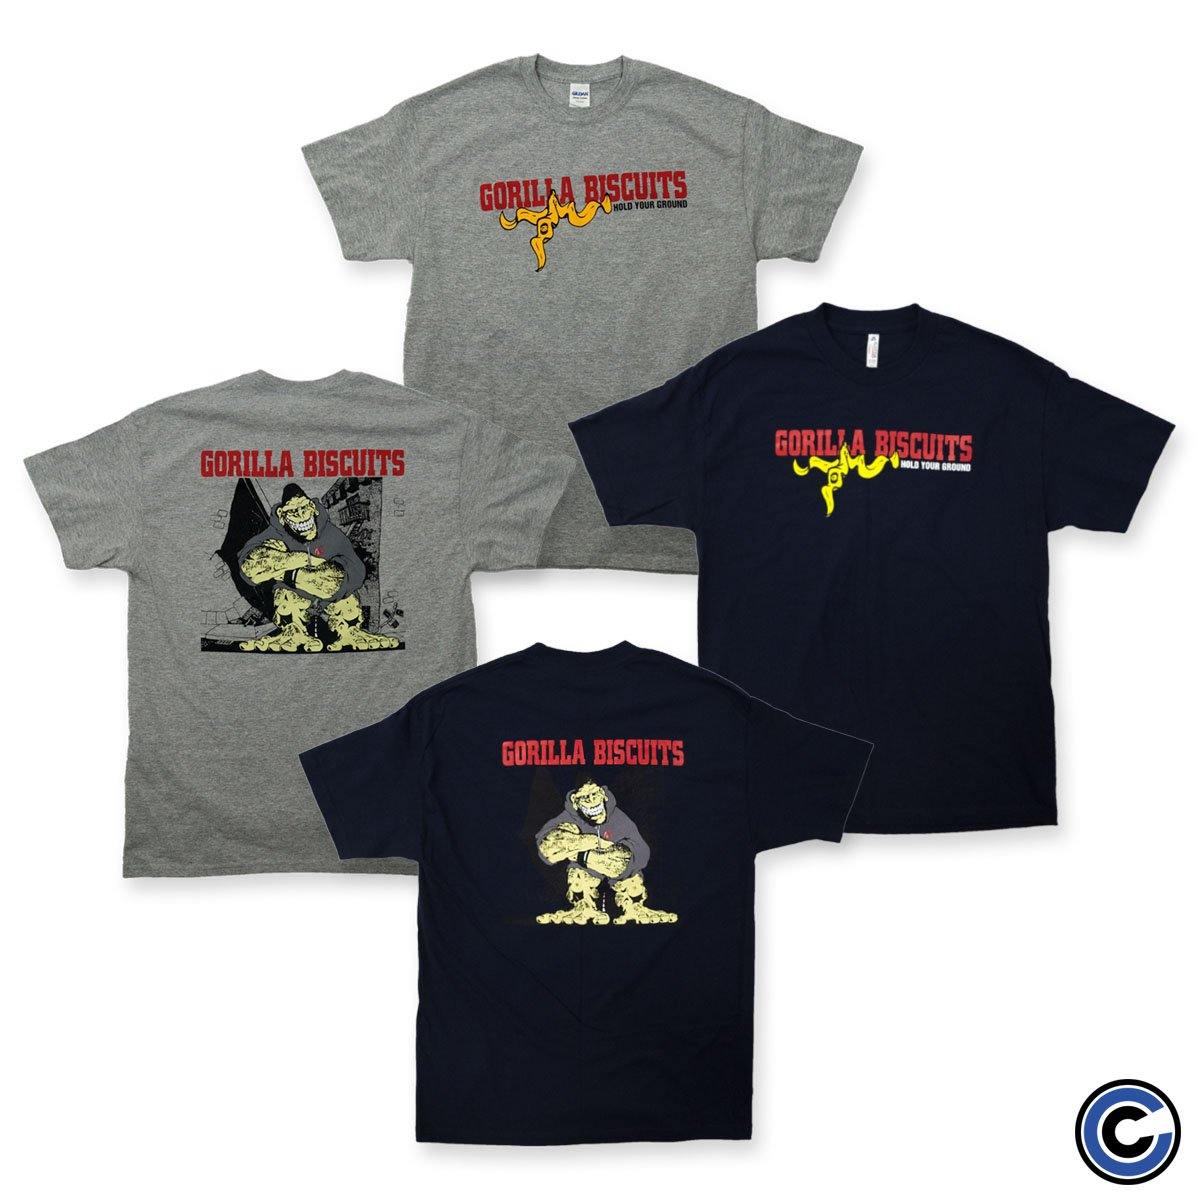 Buy – Gorilla Biscuits "Hold Your Ground" Shirt – Band & Music Merch – Cold Cuts Merch